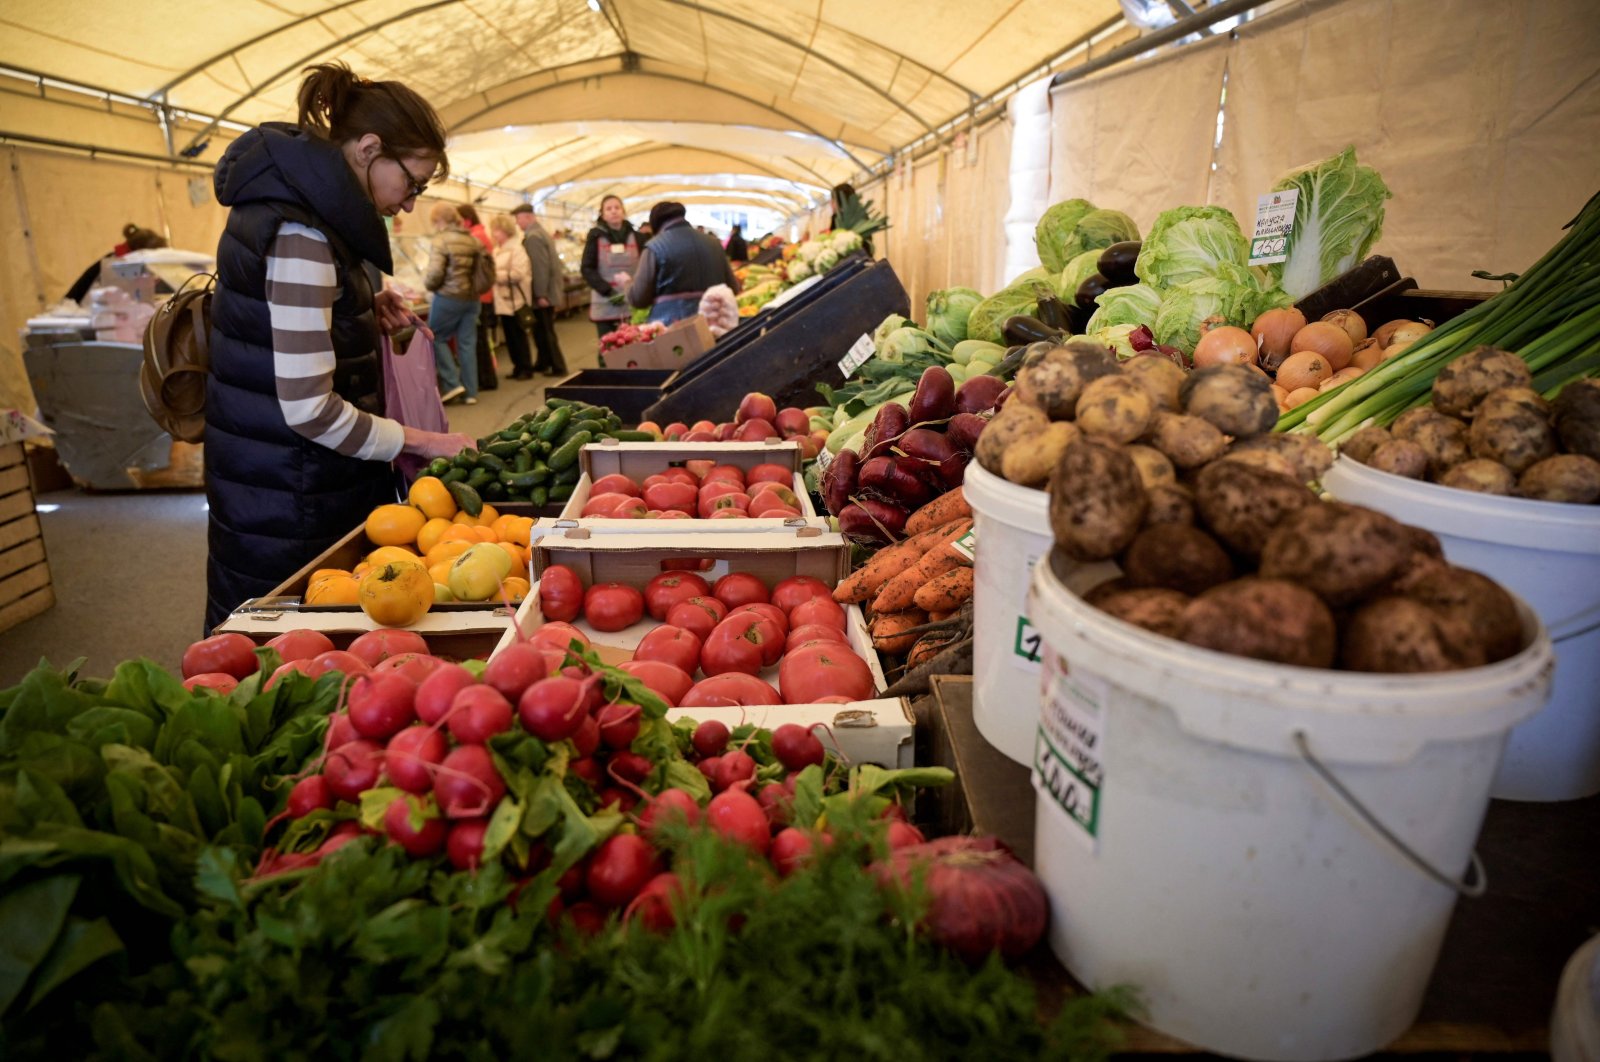 A woman buys vegetables at a food market in Moscow, Russia, April 29, 2022. (AFP Photo)